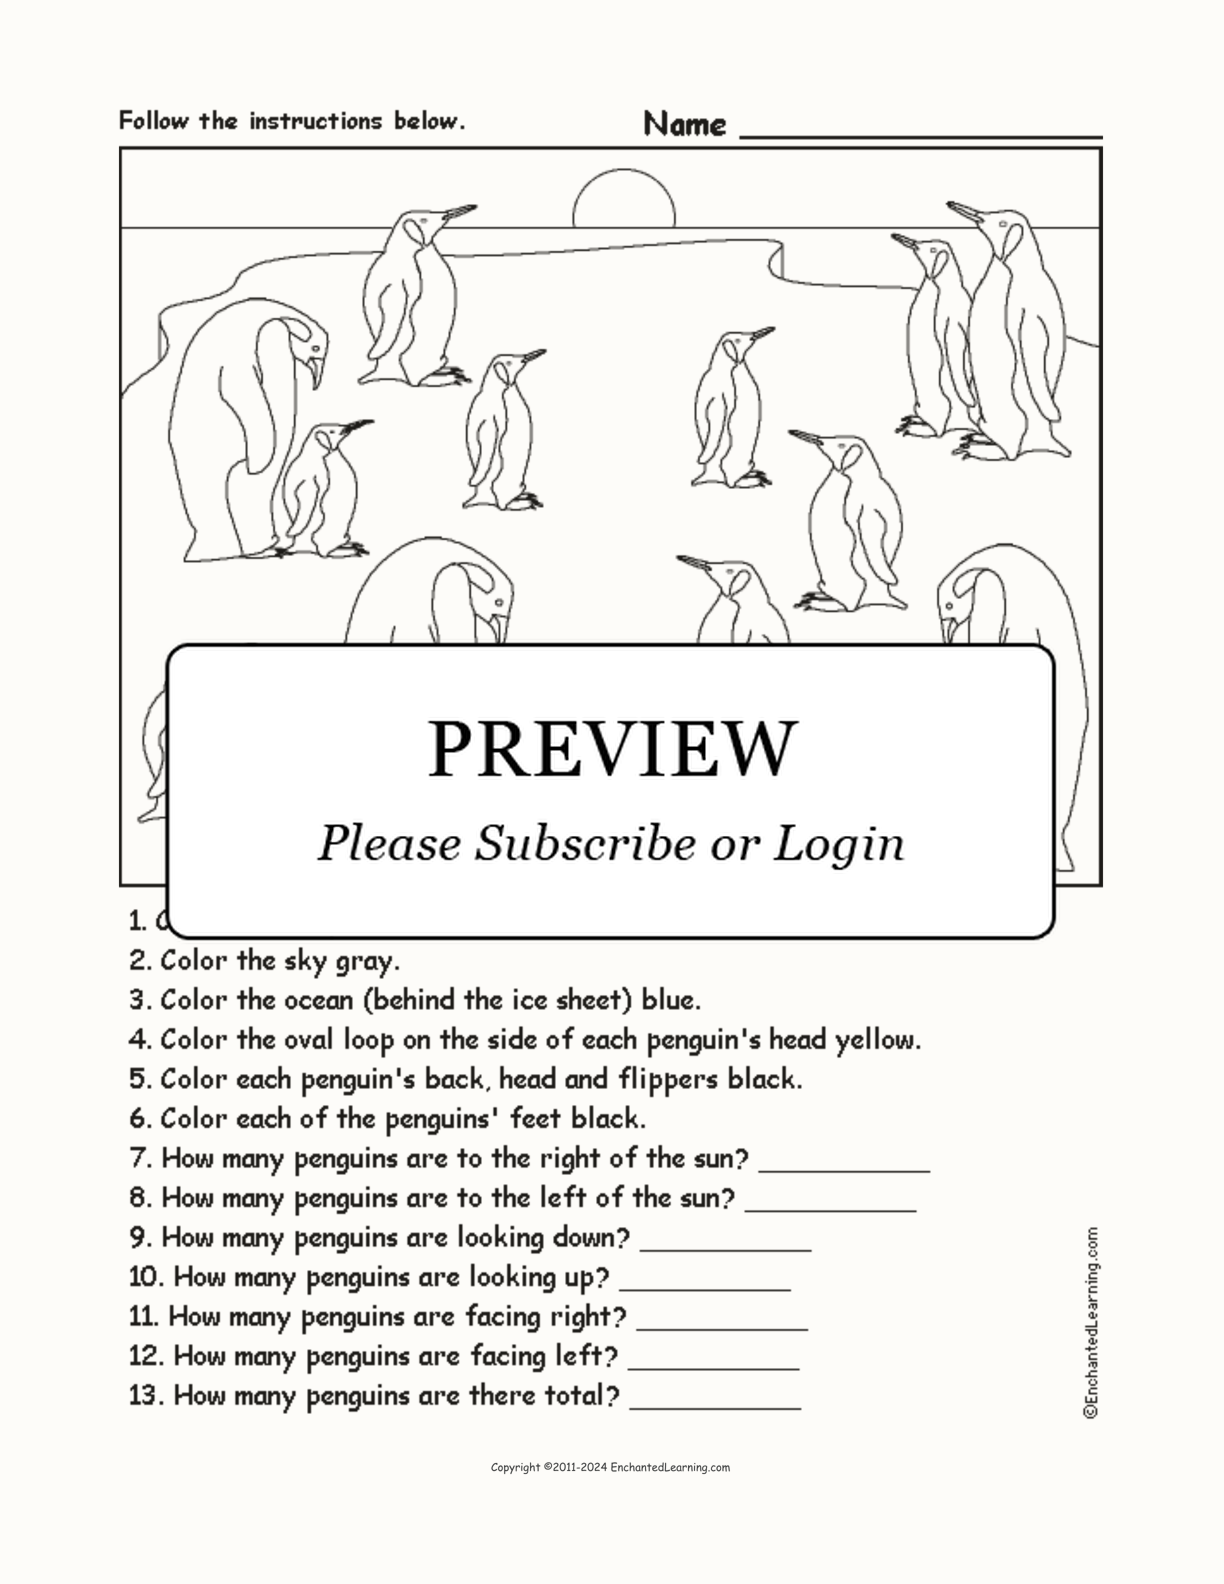 Penguins - Follow the Instructions interactive worksheet page 1